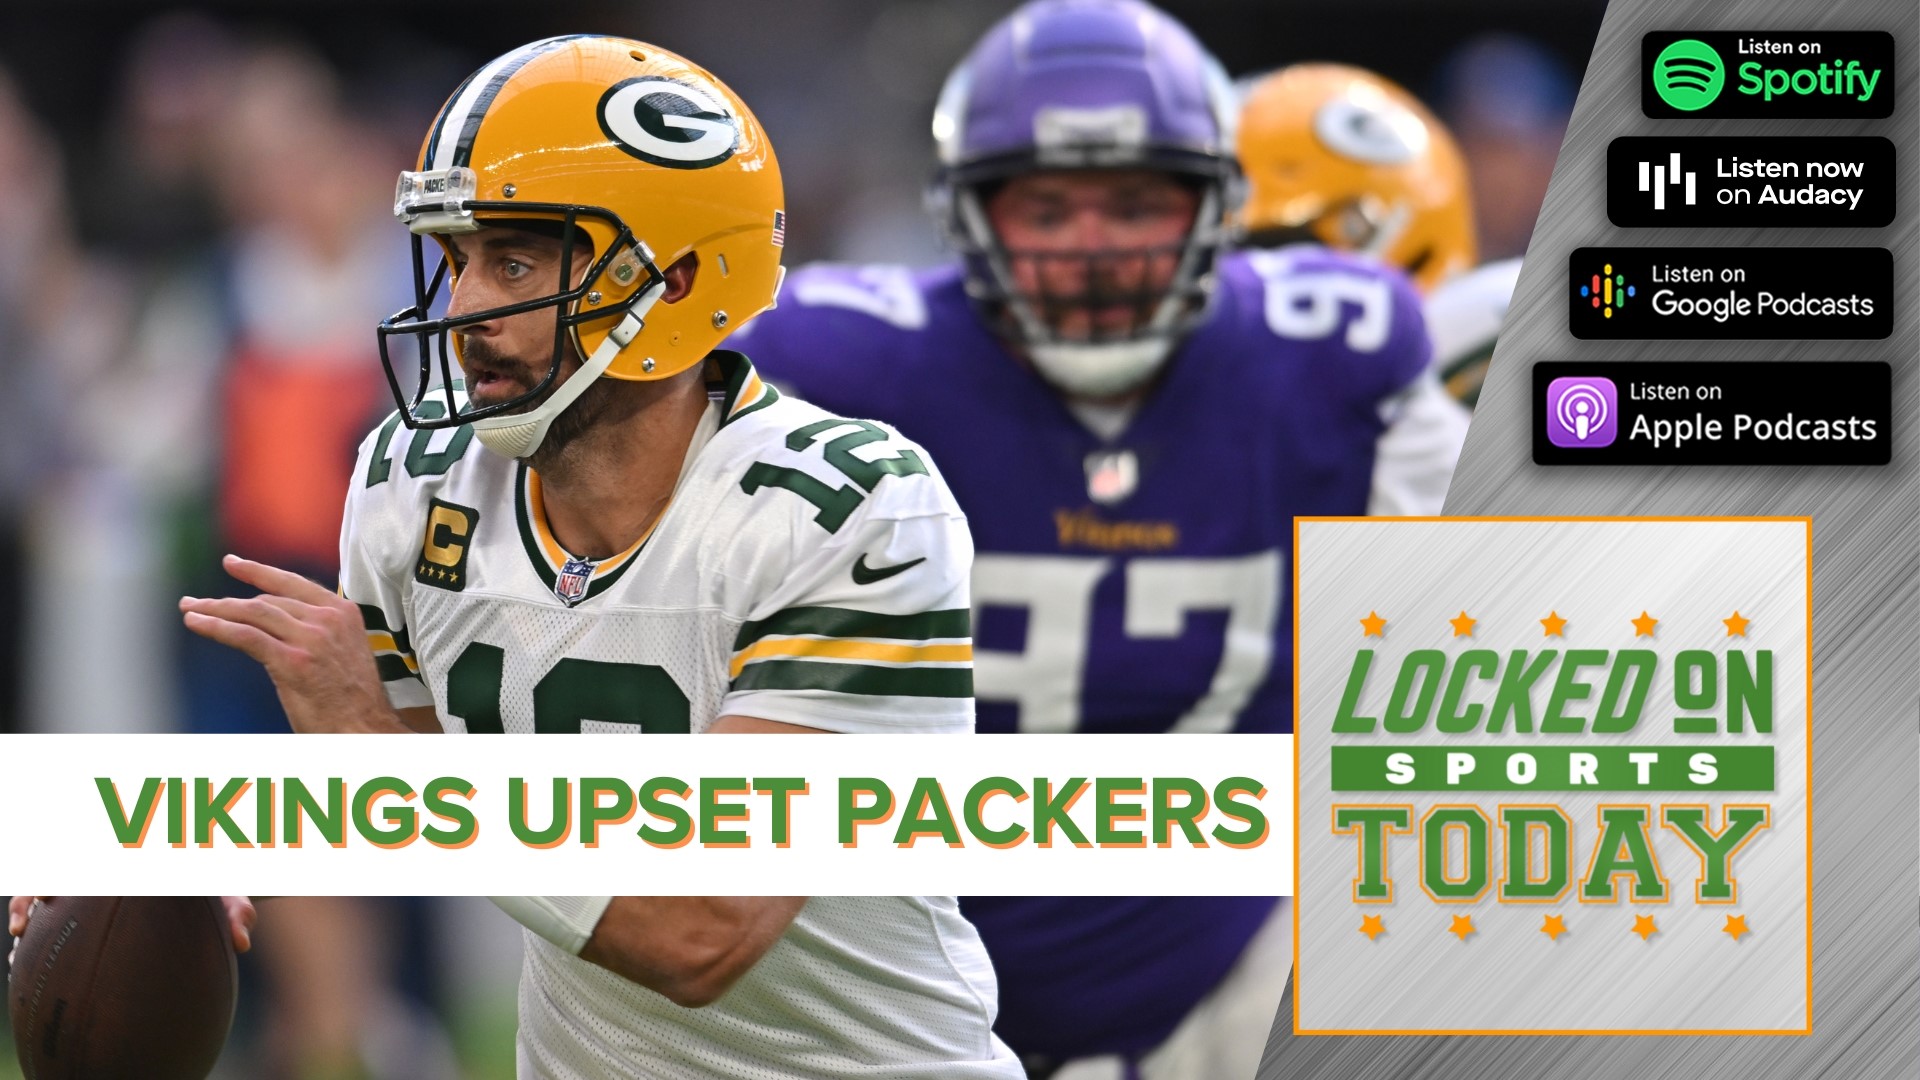 Discussing and debating the day's top sports stories from the latest update on the Dallas Cowboys and Dak Prescott's injury to the Vikings win over the Packers.